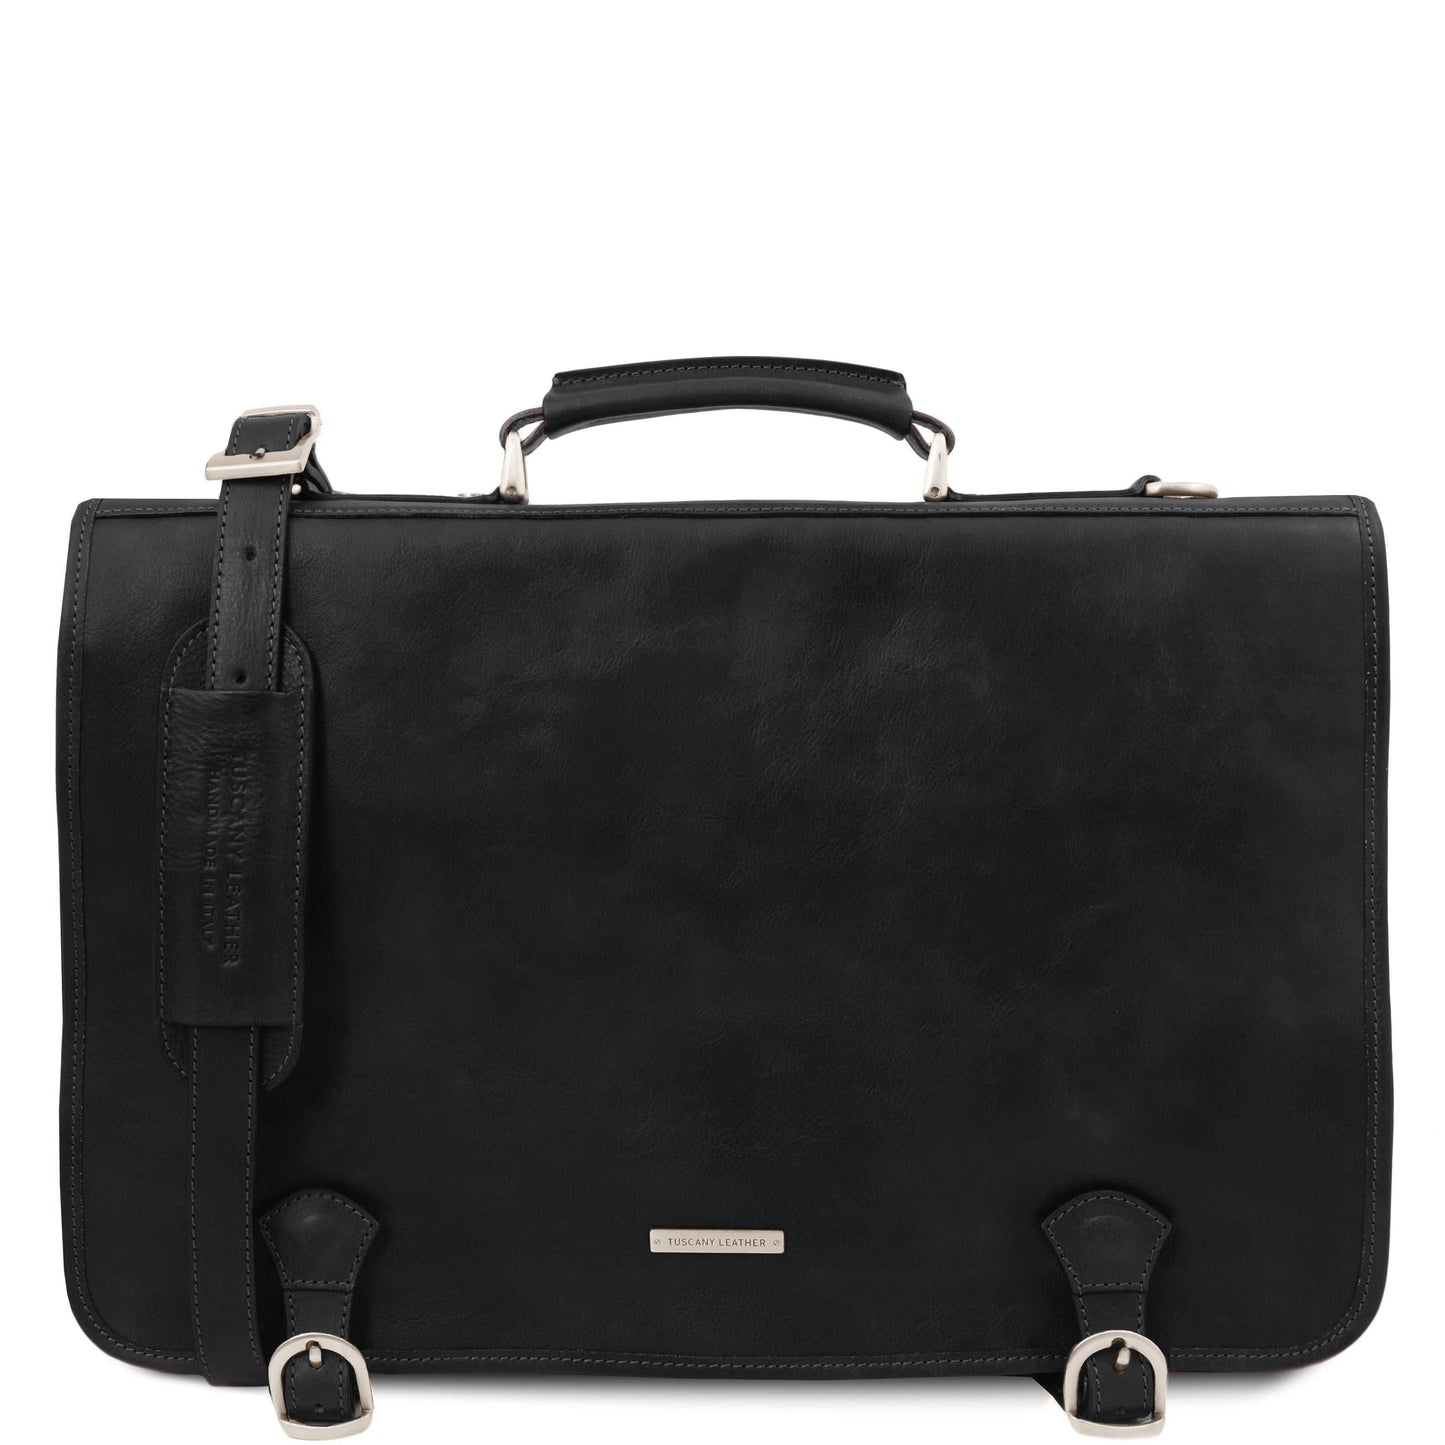 Ancona - Leather messenger bag | TL142073 - Premium Leather briefcases - Shop now at San Rocco Italia